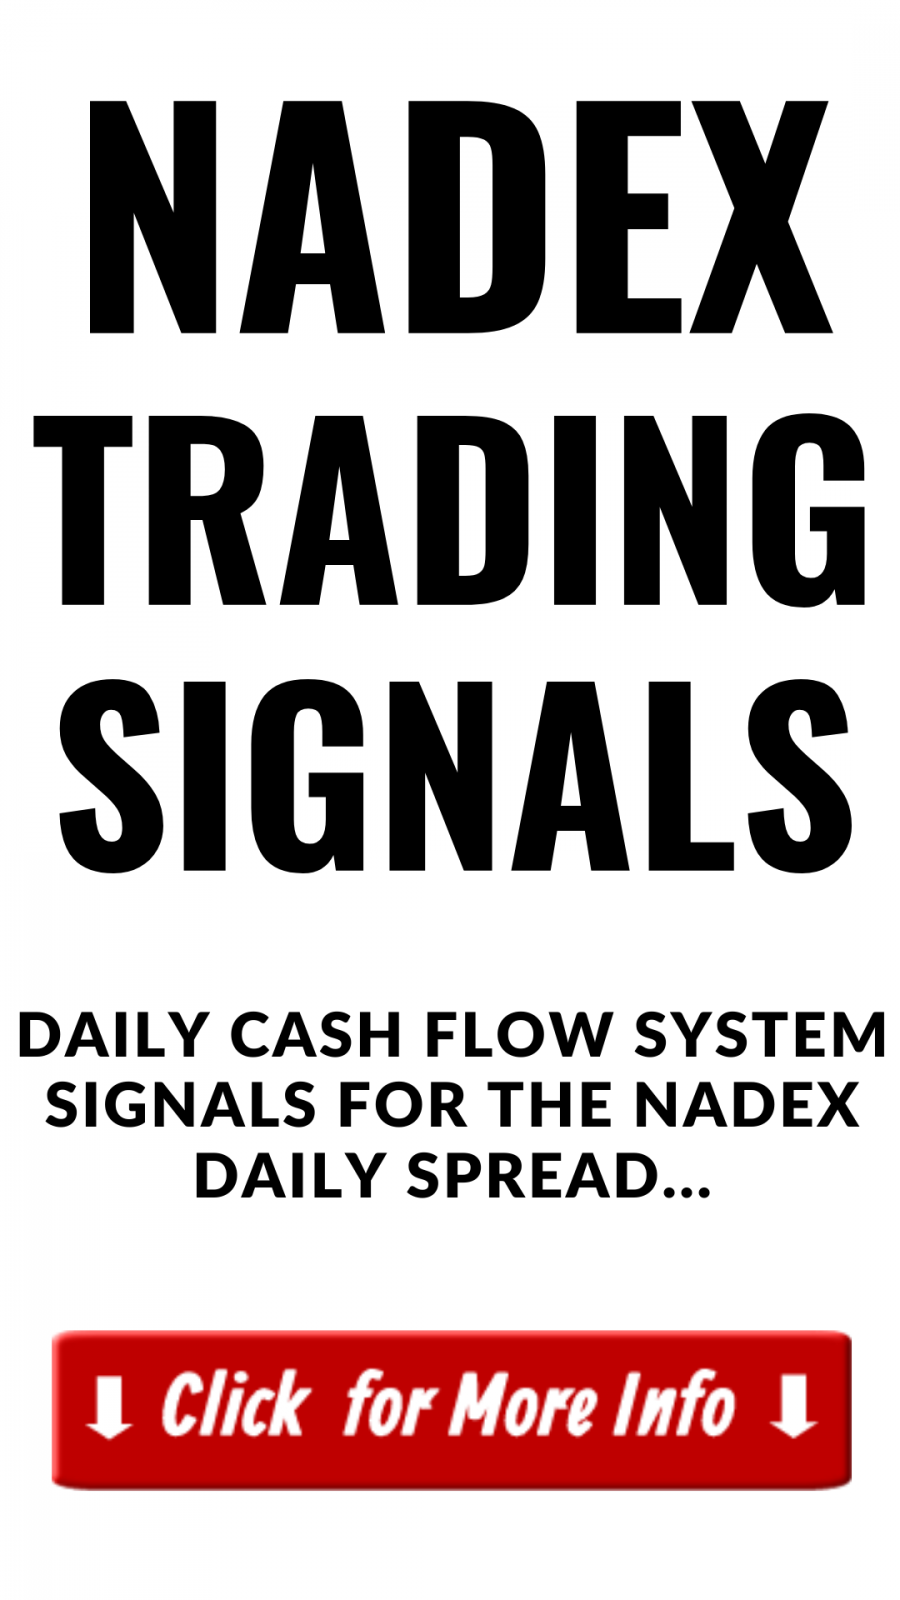 How do NADEX Trading Signals Work? 